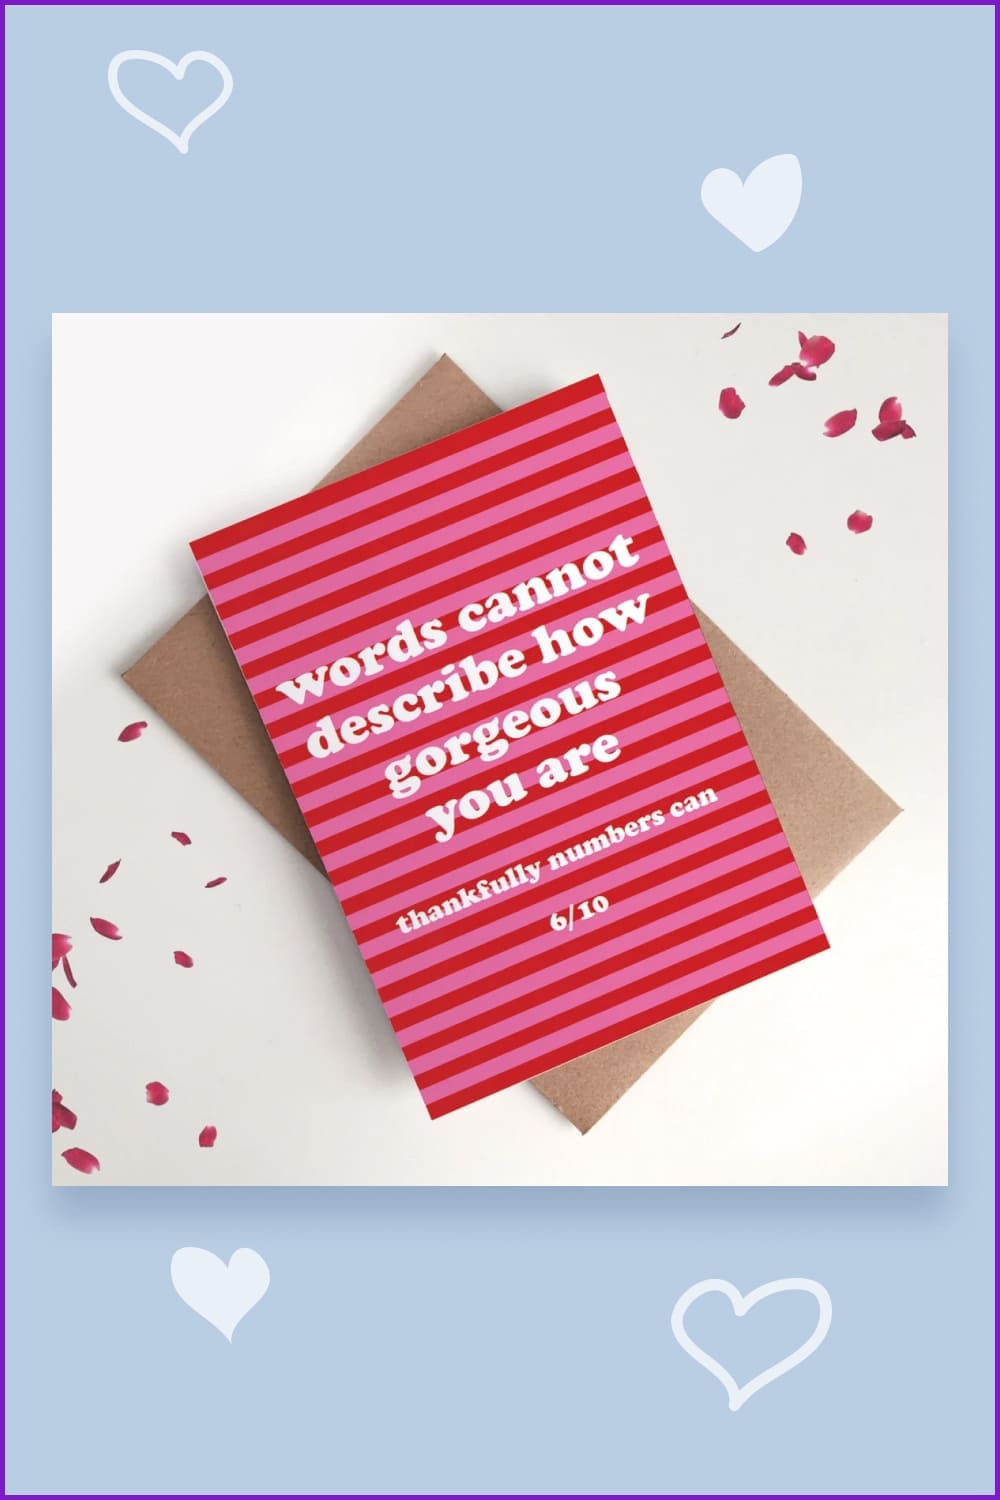 Pink and red striped card with funny text.